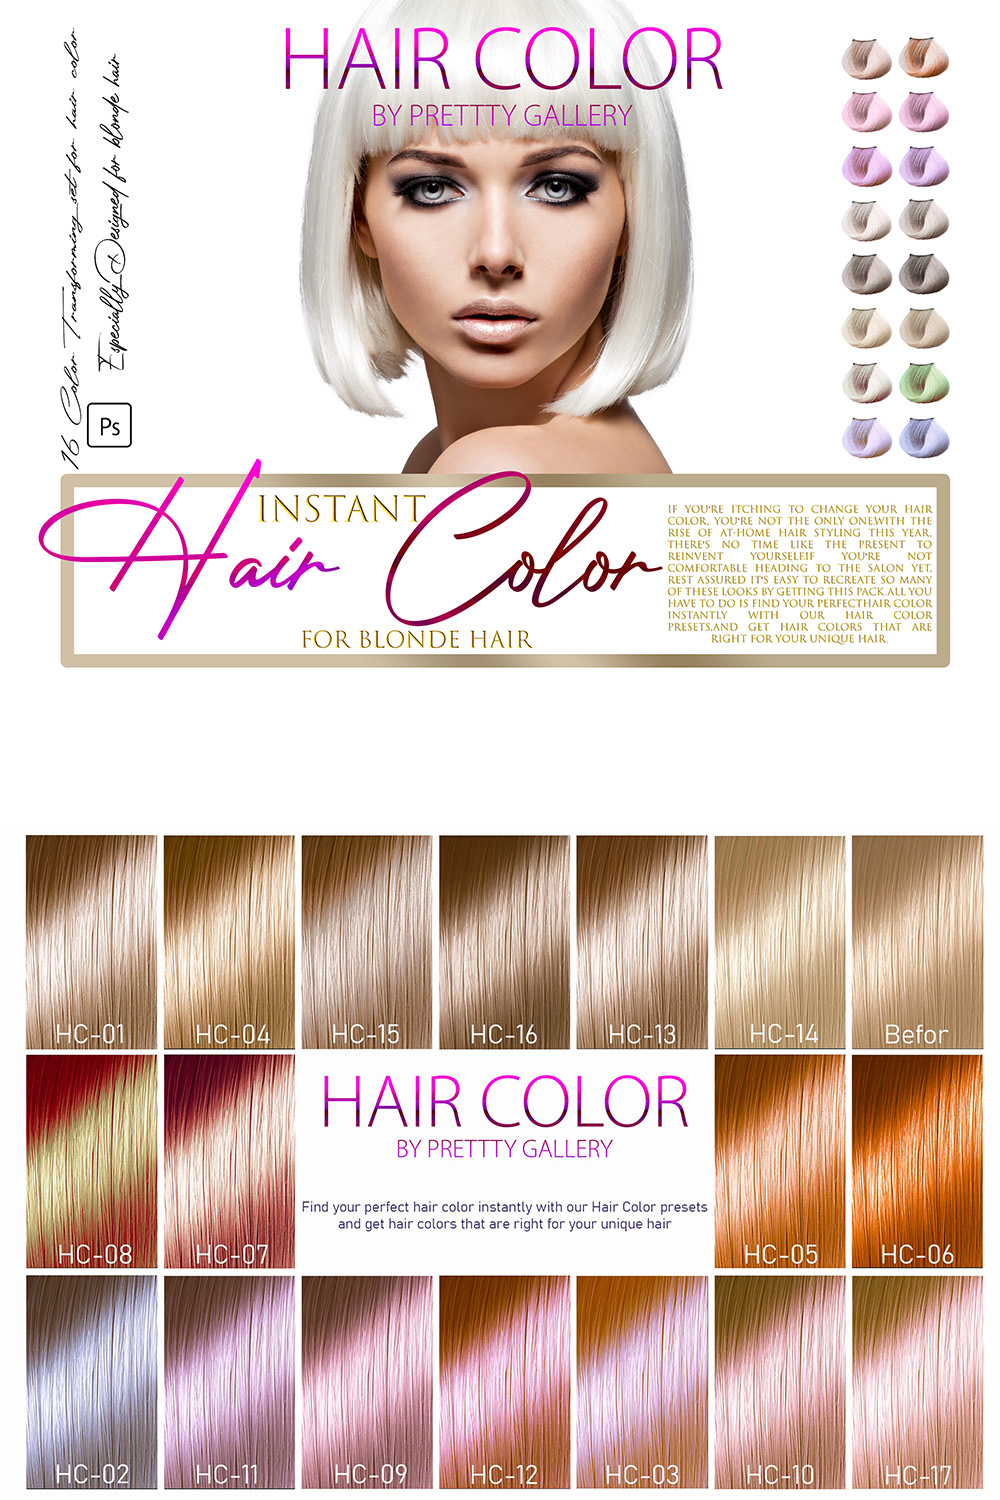 16 Hair Color Photoshop Actions, Beauty Blonde ACR Preset, Hairstyle girl Filter, Portrait And Lifestyle Theme For Instagram, Blogger, Outdoor pinterest preview image.